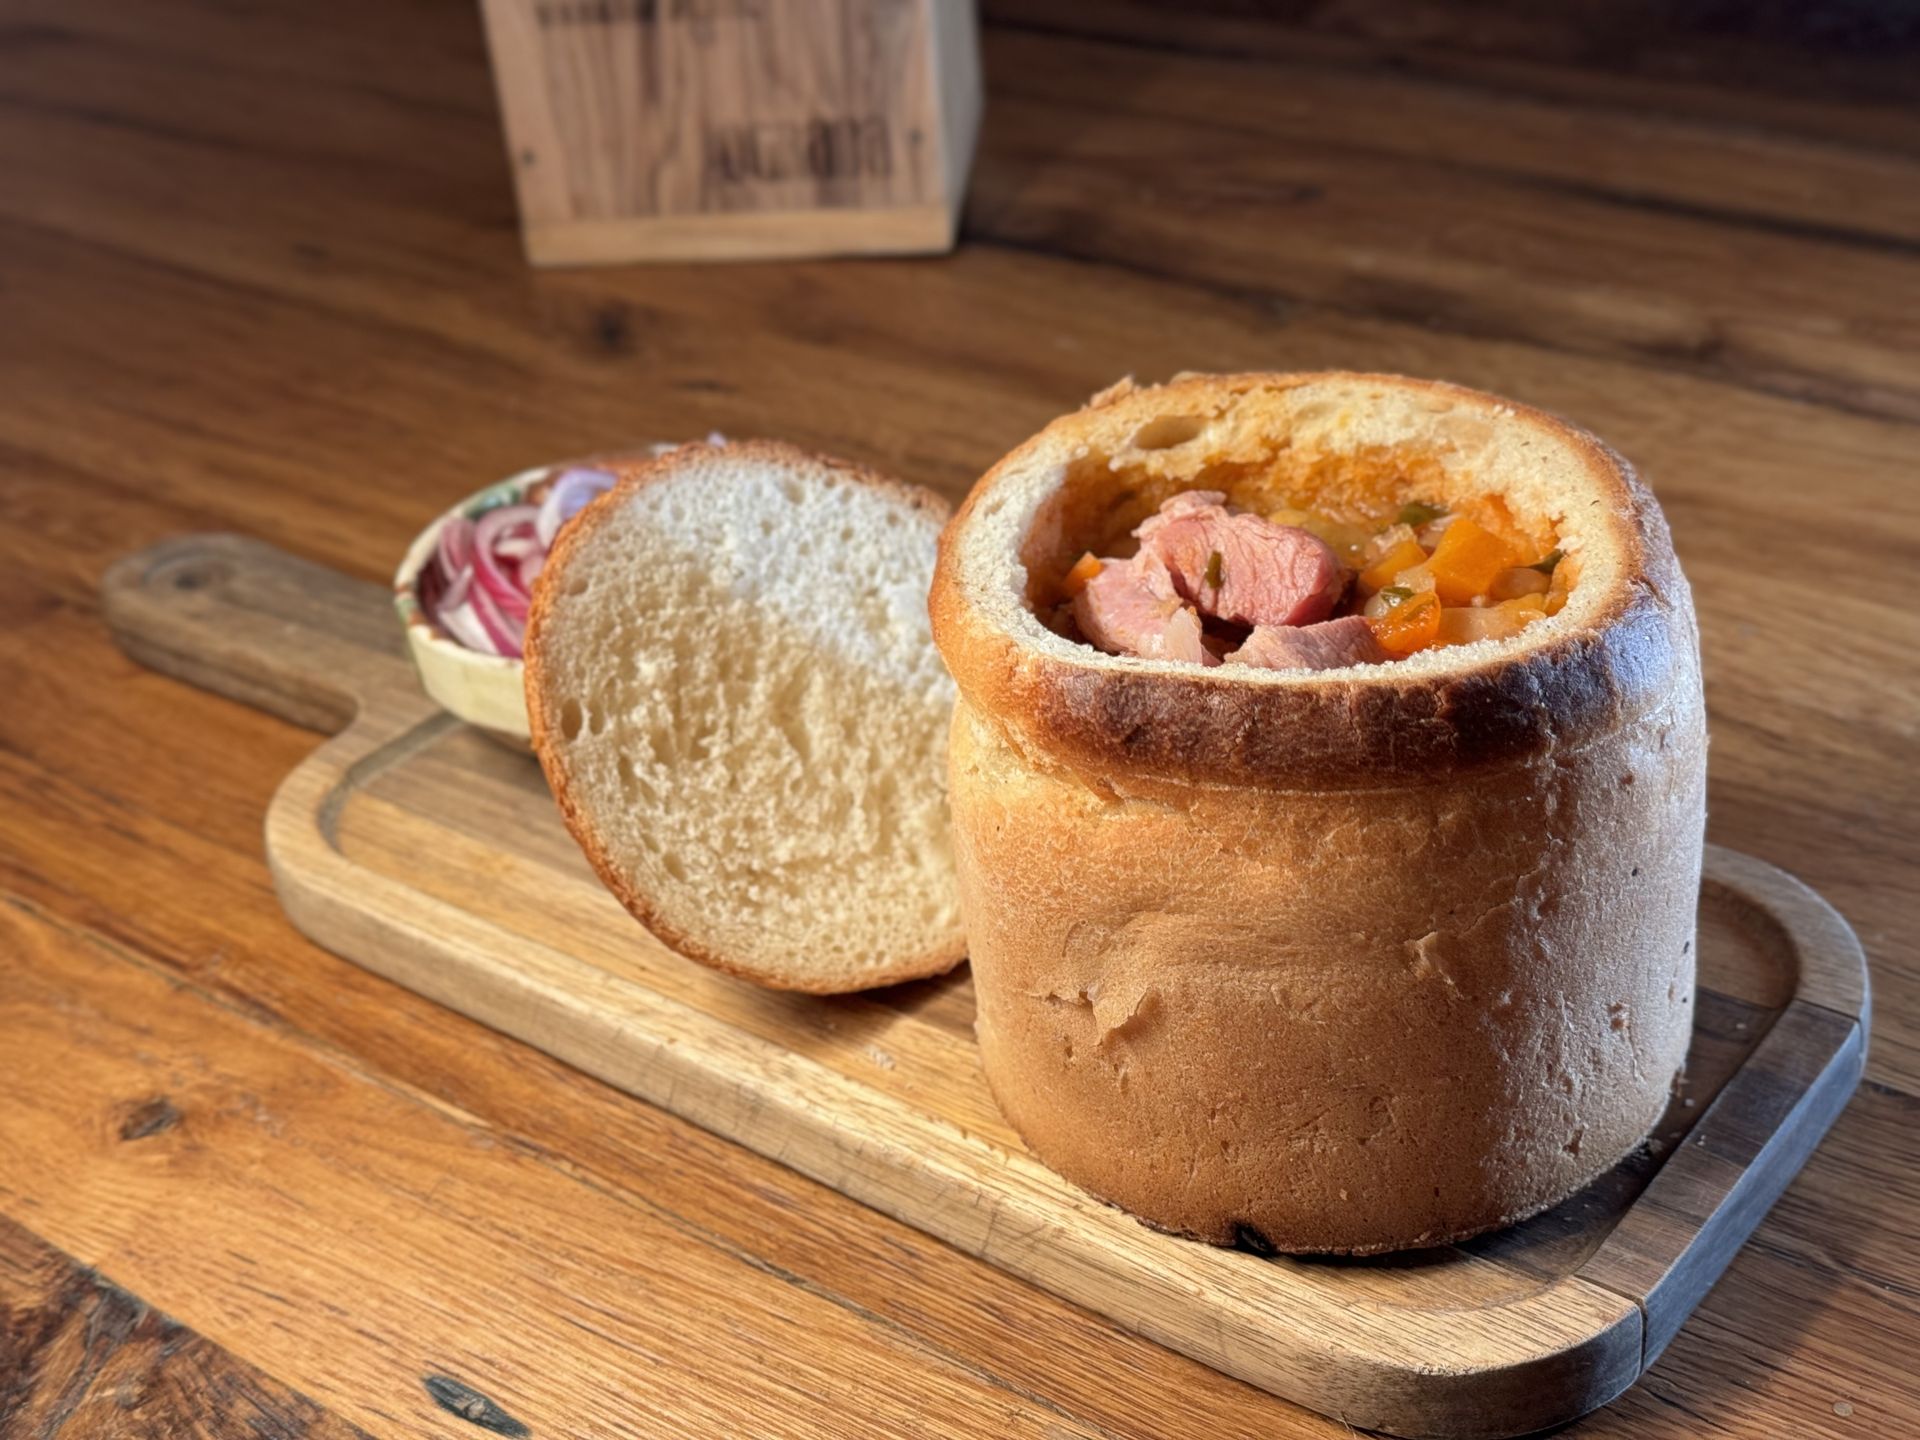 Bean soup with smoked ham served in bread